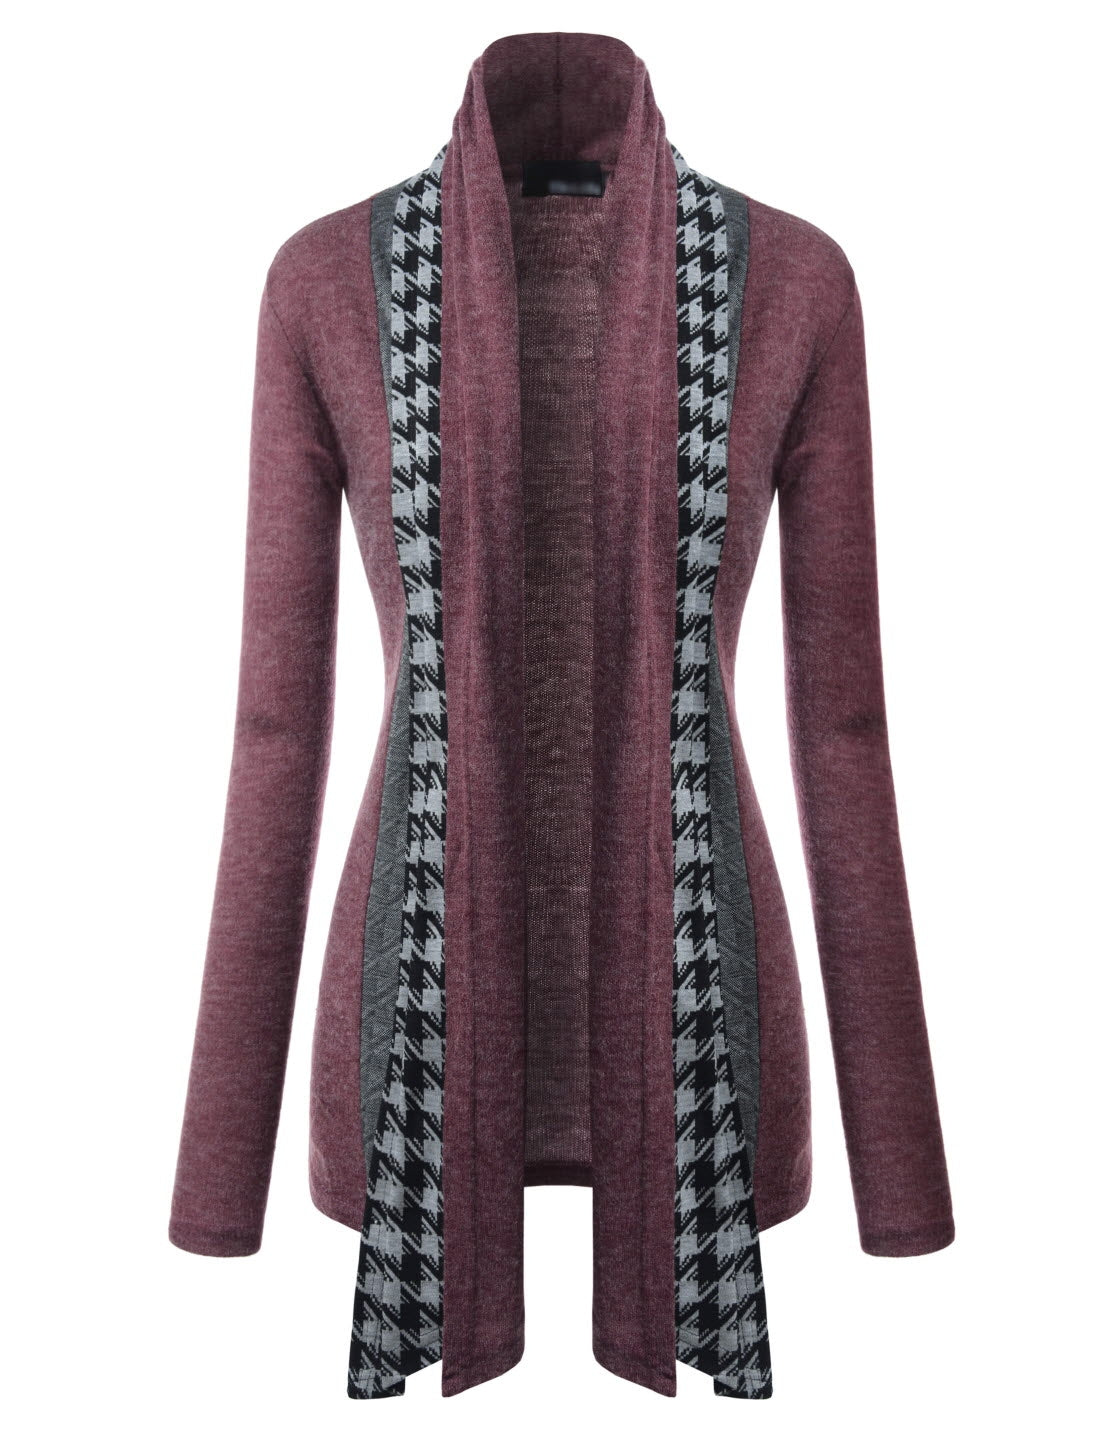 Burgundy Red Houndstooth Shawl Collar Knitted Open Cardigans